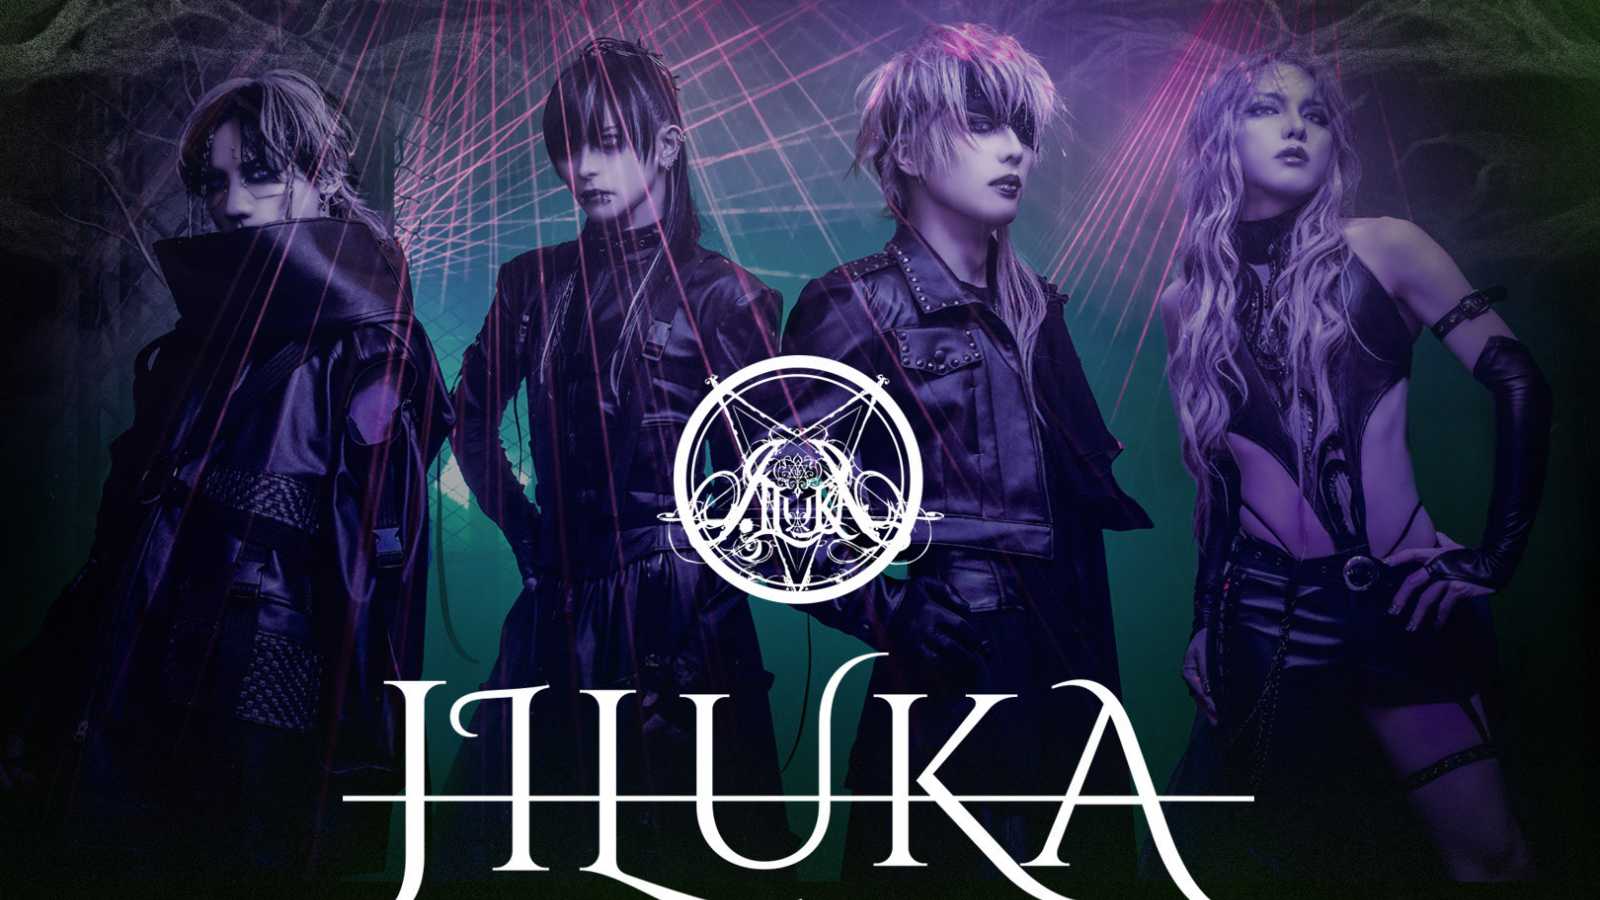 JILUKA to Perform in Portugal © JILUKA. All rights reserved.